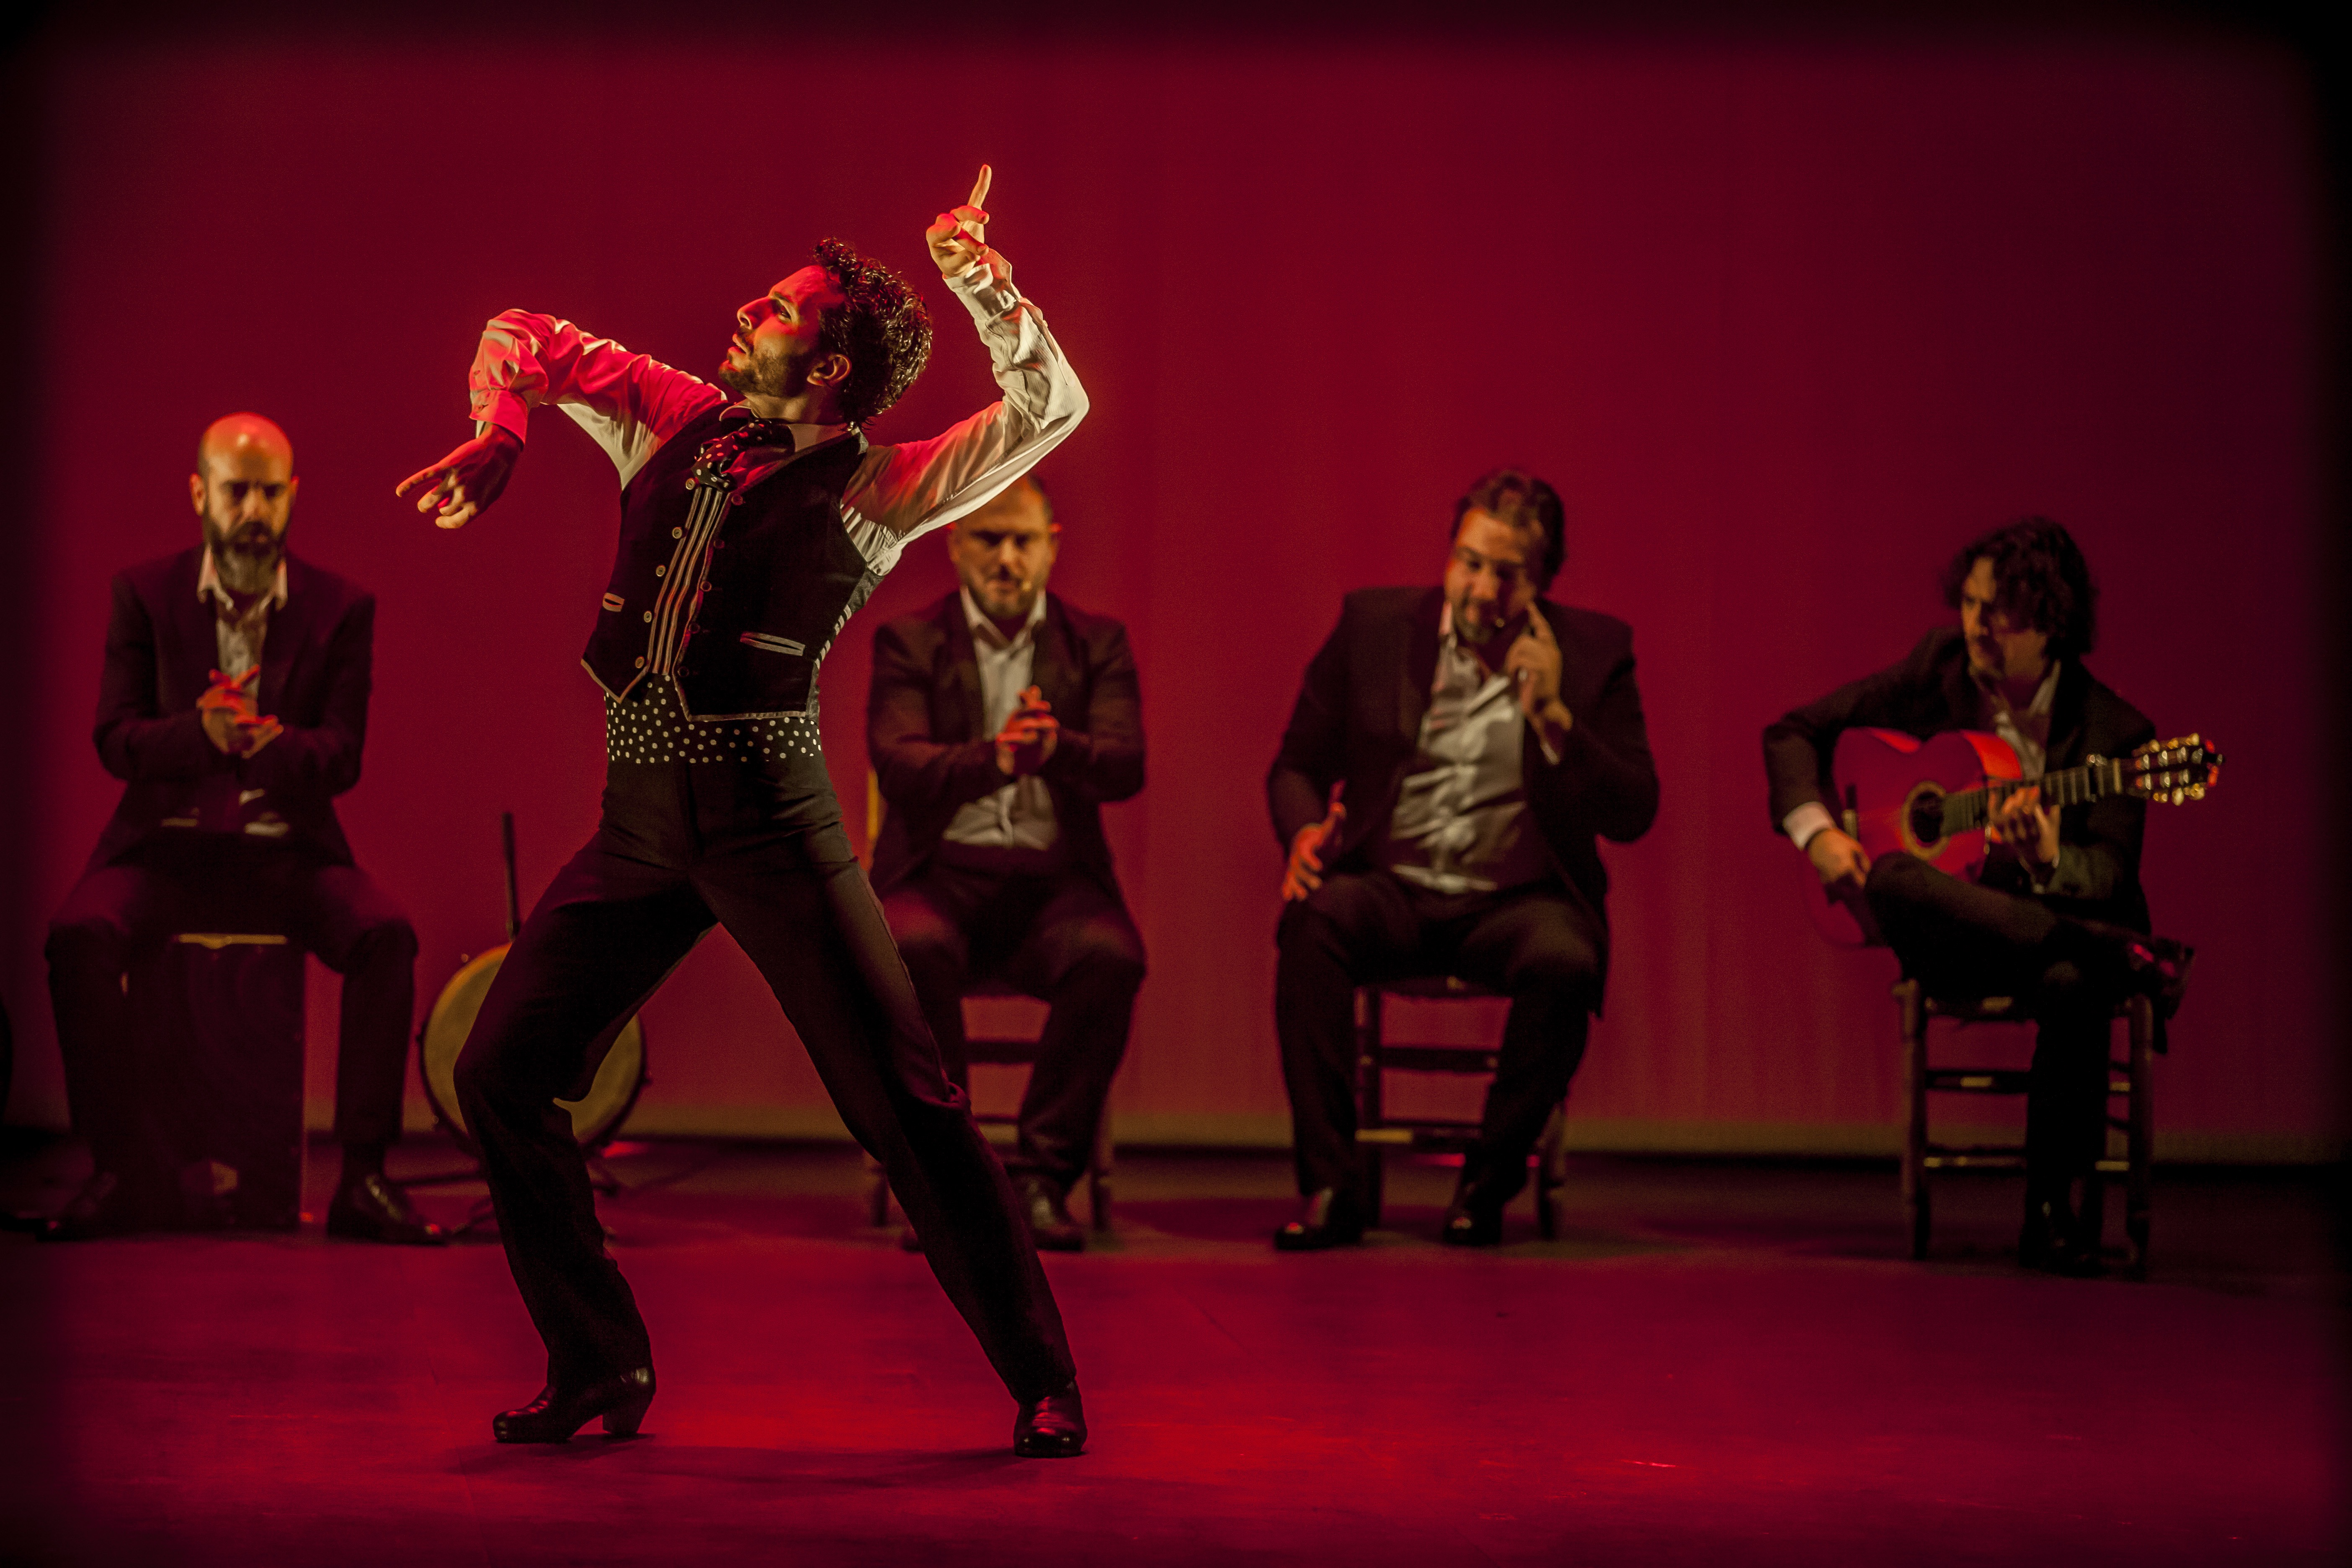 Flamenco dancer on stage with musicians